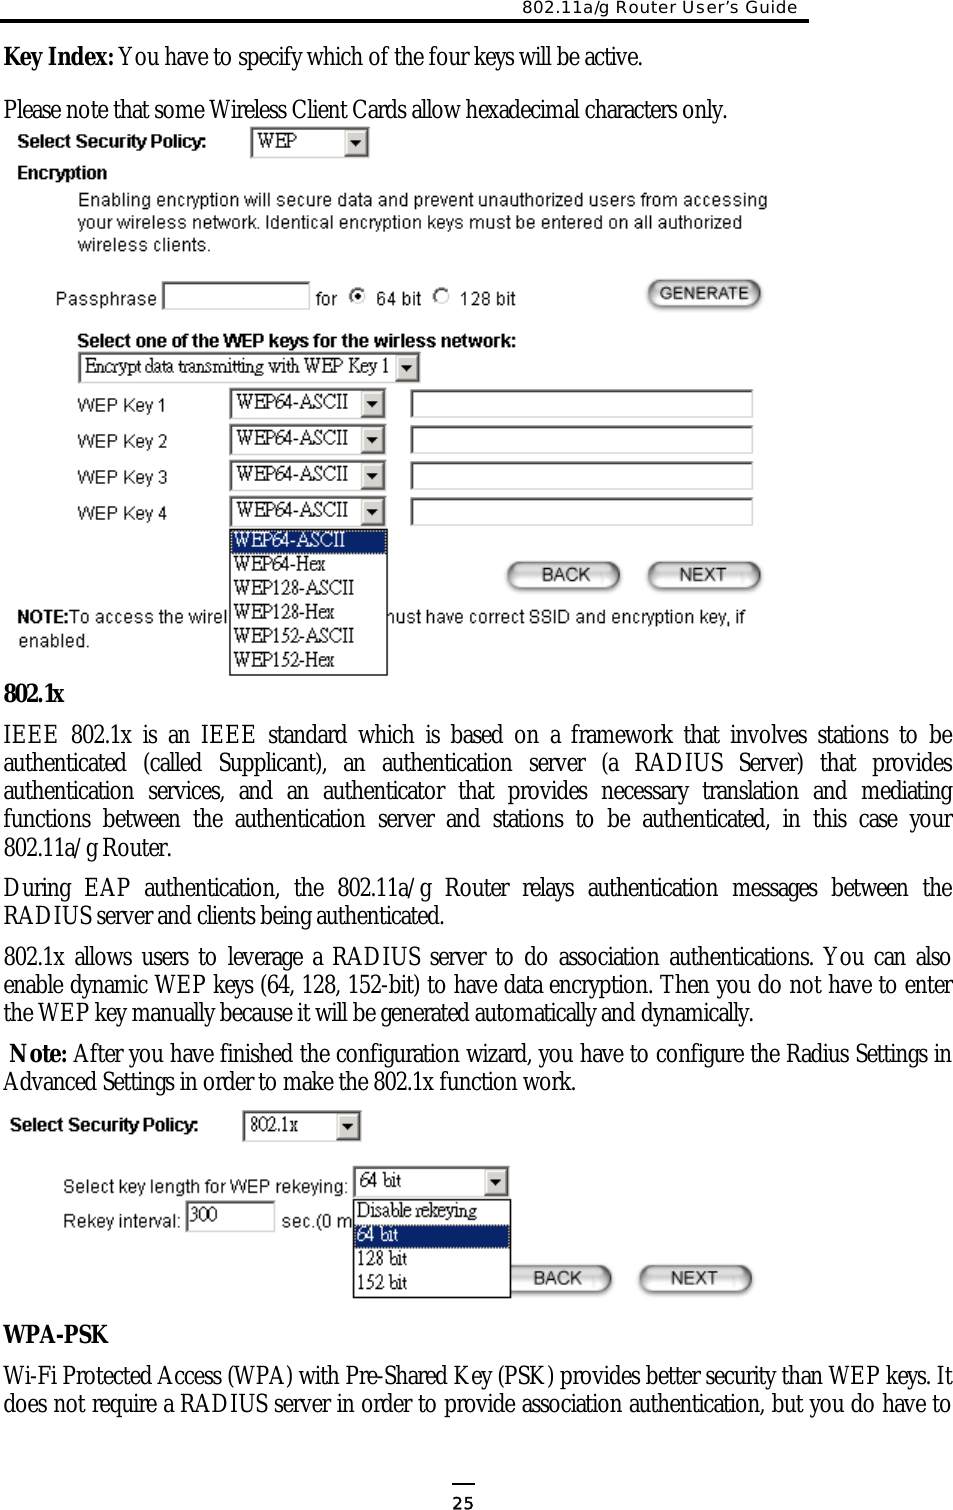 802.11a/g Router User’s Guide  Key Index: You have to specify which of the four keys will be active. Please note that some Wireless Client Cards allow hexadecimal characters only.           802.1x IEEE 802.1x is an IEEE standard which is based on a framework that involves stations to be authenticated (called Supplicant), an authentication server (a RADIUS Server) that provides authentication services, and an authenticator that provides necessary translation and mediating functions between the authentication server and stations to be authenticated, in this case your 802.11a/g Router. During EAP authentication, the 802.11a/g Router relays authentication messages between the RADIUS server and clients being authenticated.  802.1x allows users to leverage a RADIUS server to do association authentications. You can also enable dynamic WEP keys (64, 128, 152-bit) to have data encryption. Then you do not have to enter the WEP key manually because it will be generated automatically and dynamically.  Note: After you have finished the configuration wizard, you have to configure the Radius Settings in Advanced Settings in order to make the 802.1x function work.     WPA-PSK Wi-Fi Protected Access (WPA) with Pre-Shared Key (PSK) provides better security than WEP keys. It does not require a RADIUS server in order to provide association authentication, but you do have to  25